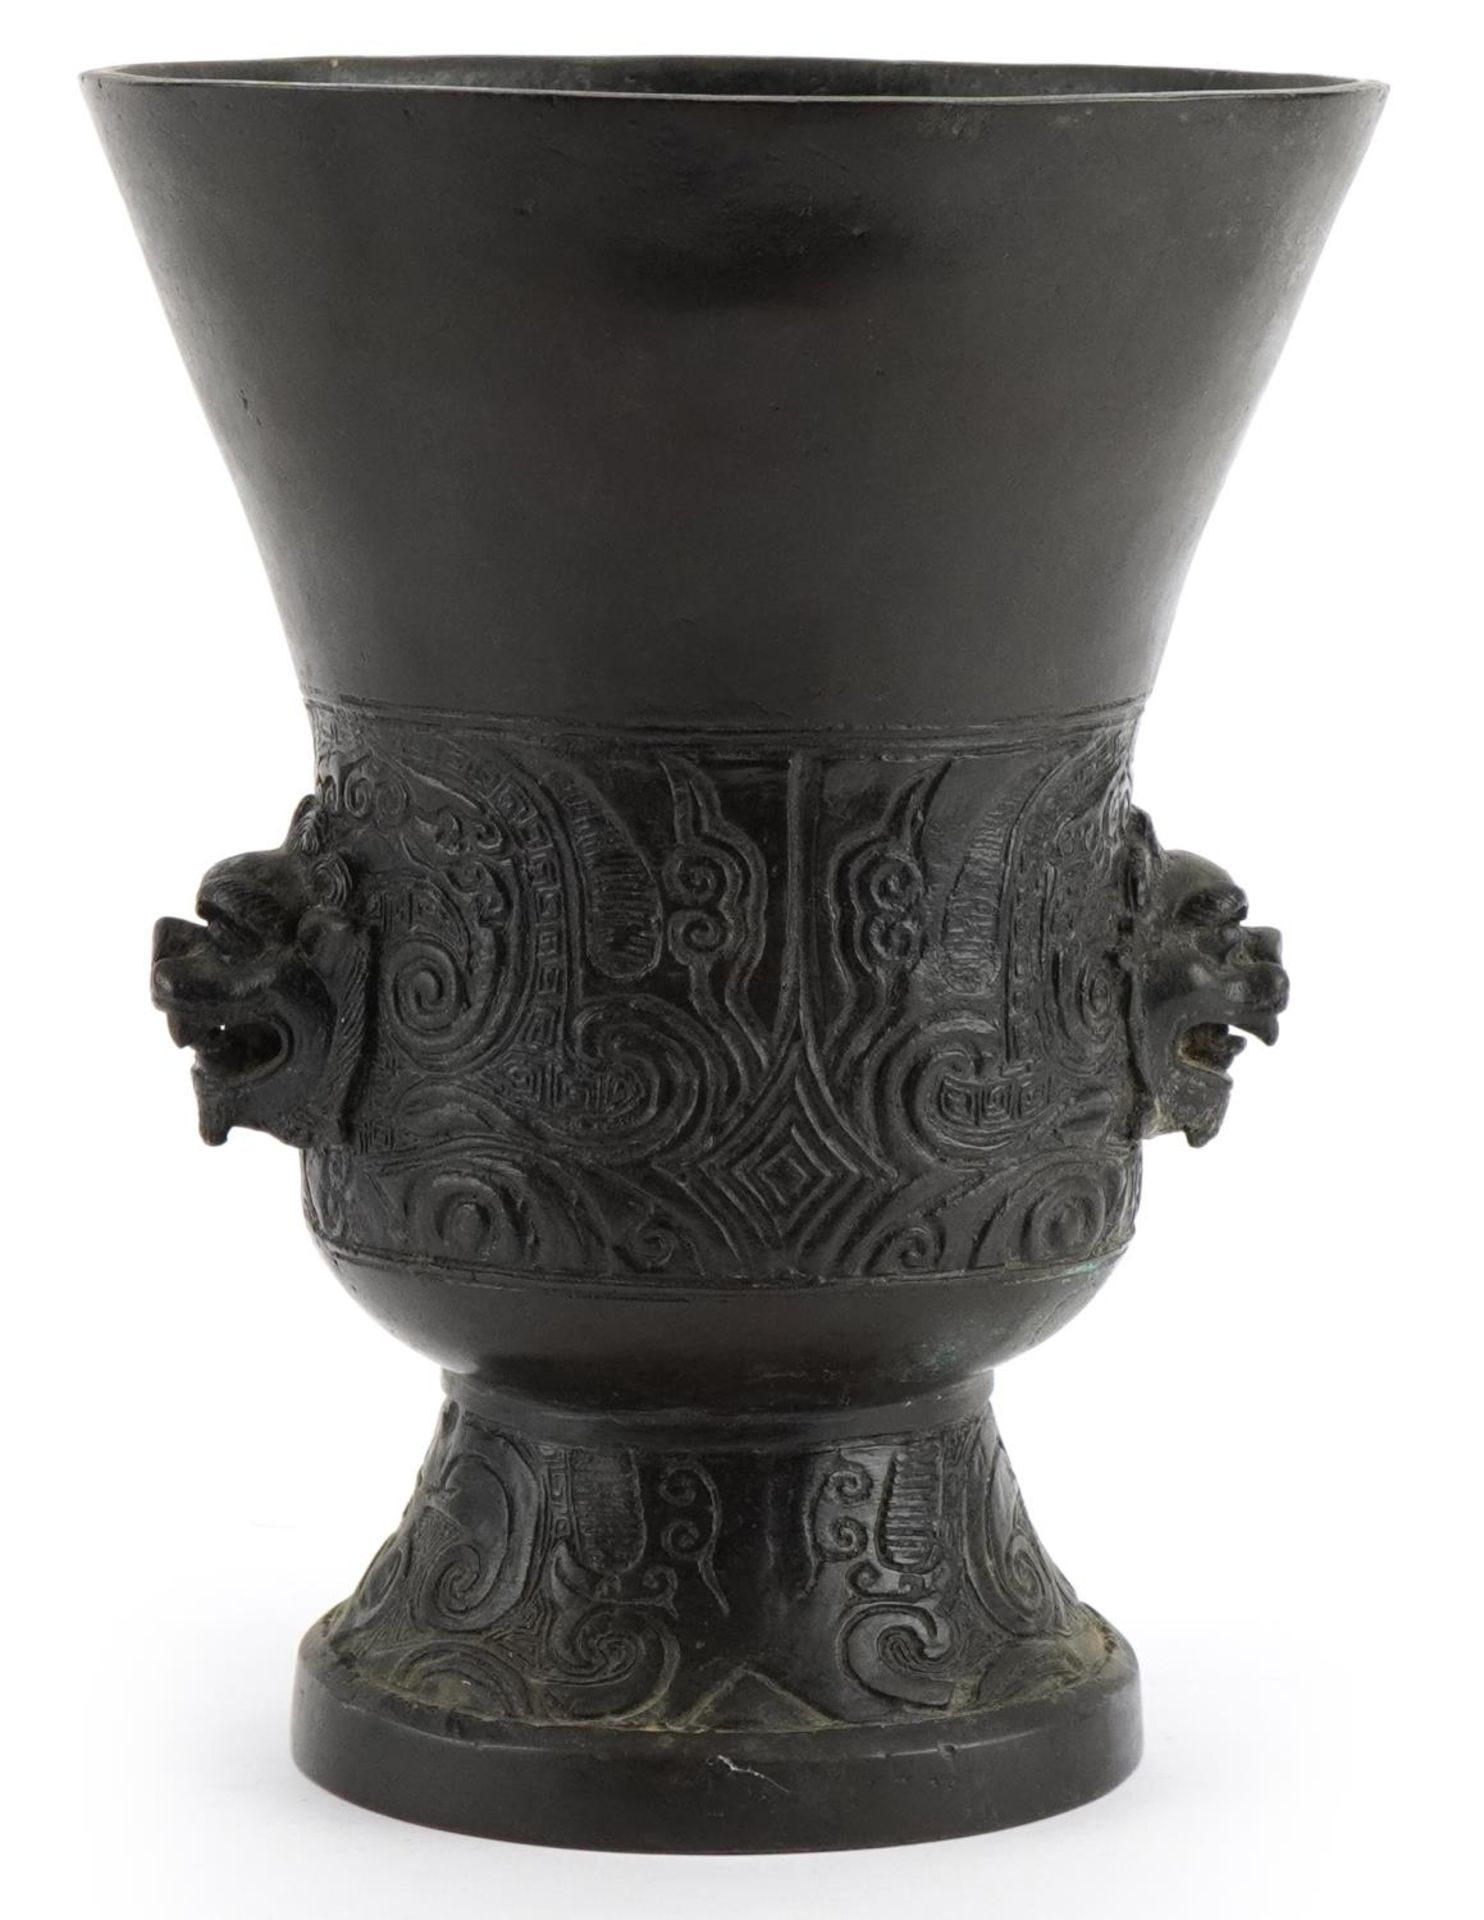 Chinese patinated bronze archaic style vessel with mythical head handles, 21cm high